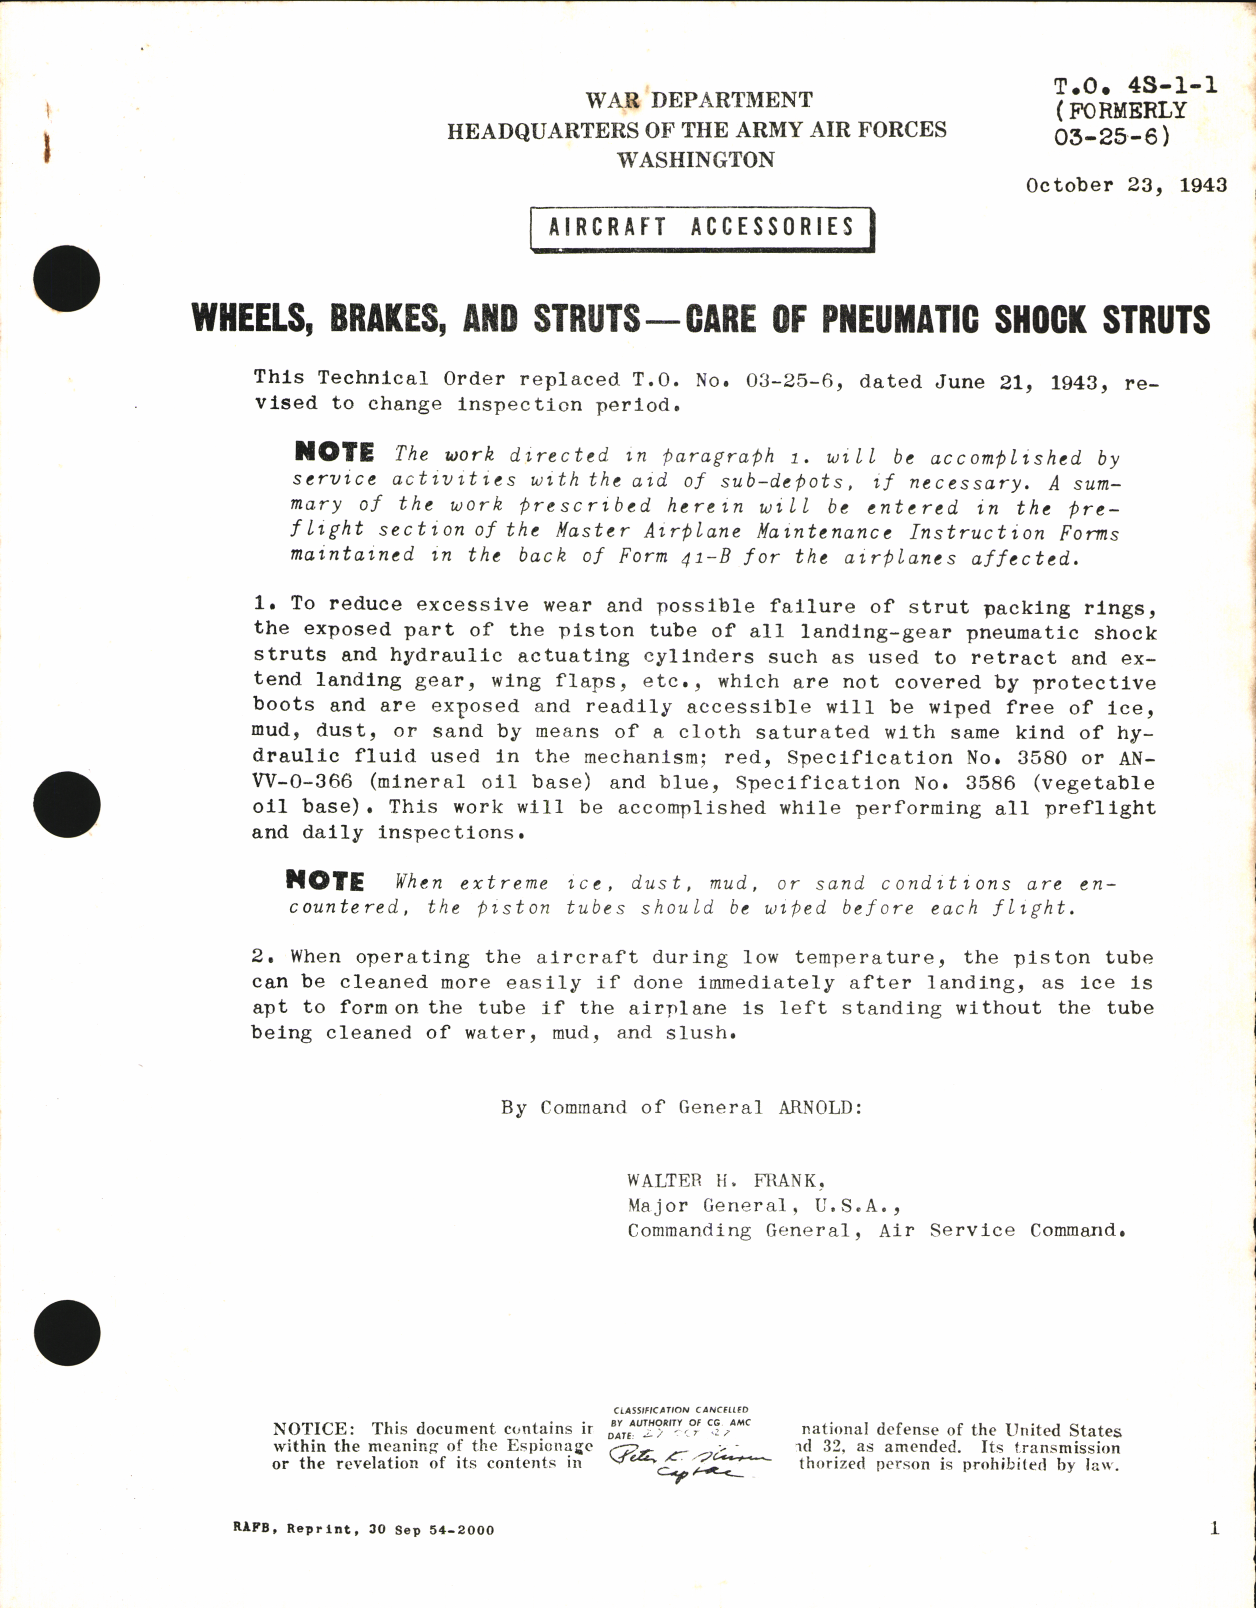 Sample page 1 from AirCorps Library document: Care of Pneumatic Shock Struts